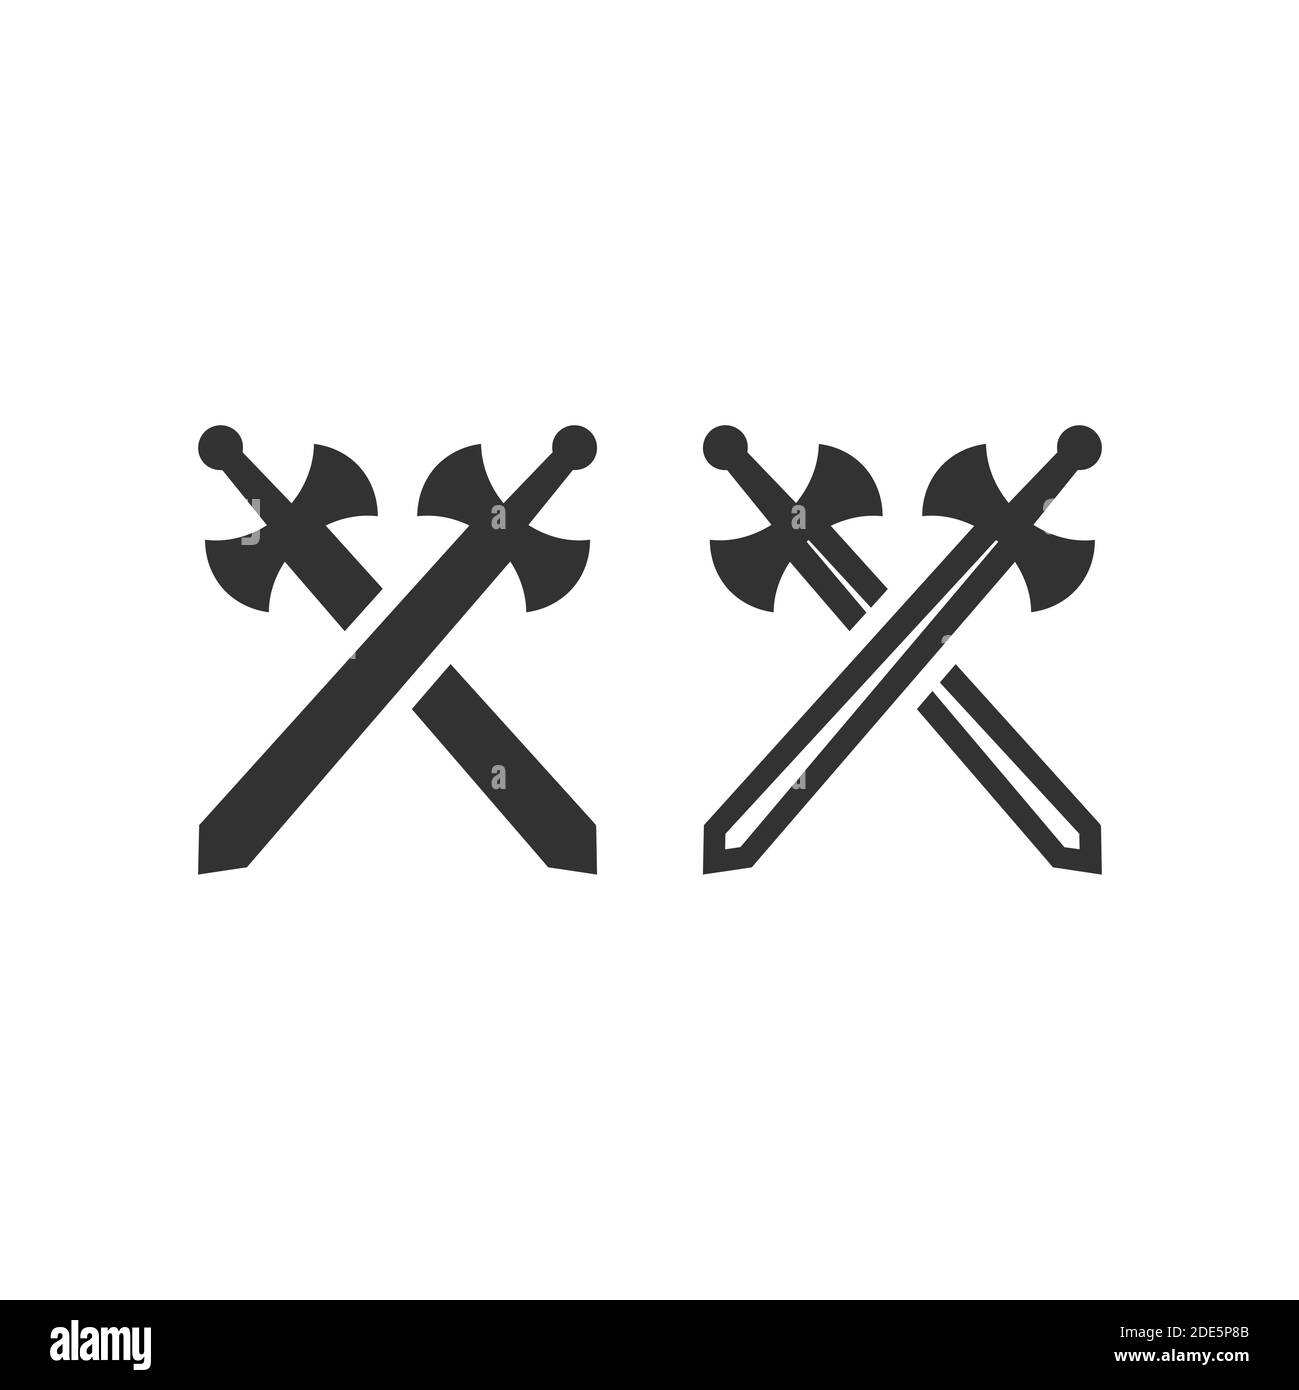 34+ Thousand Crossed Swords Royalty-Free Images, Stock Photos & Pictures